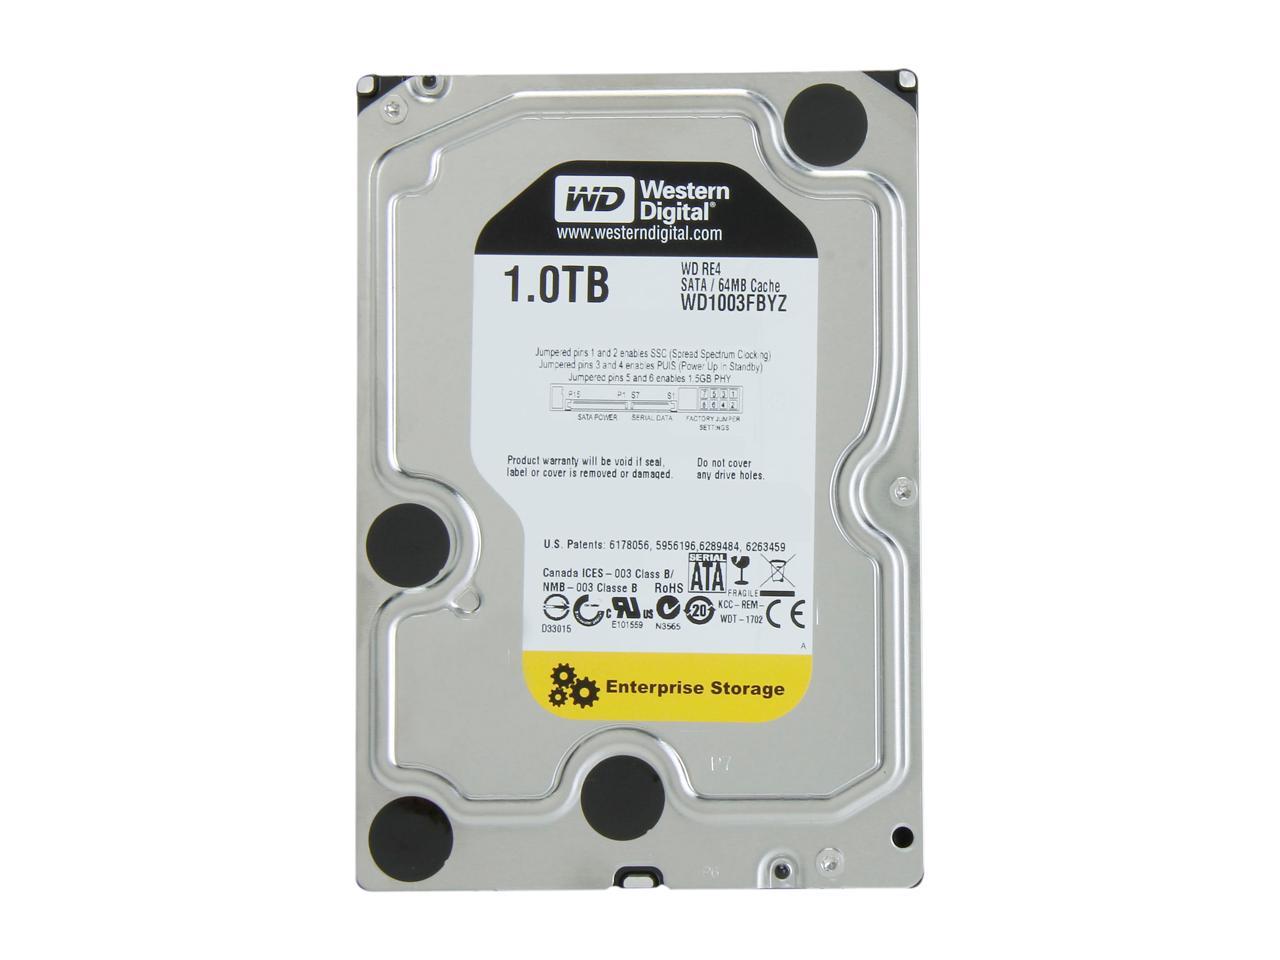 WD Re 1TB Datacenter Capacity Hard Disk Drive - 7200 RPM Class SATA 6Gb/s 64MB Cache 3.5 inch WD1003FBYZ